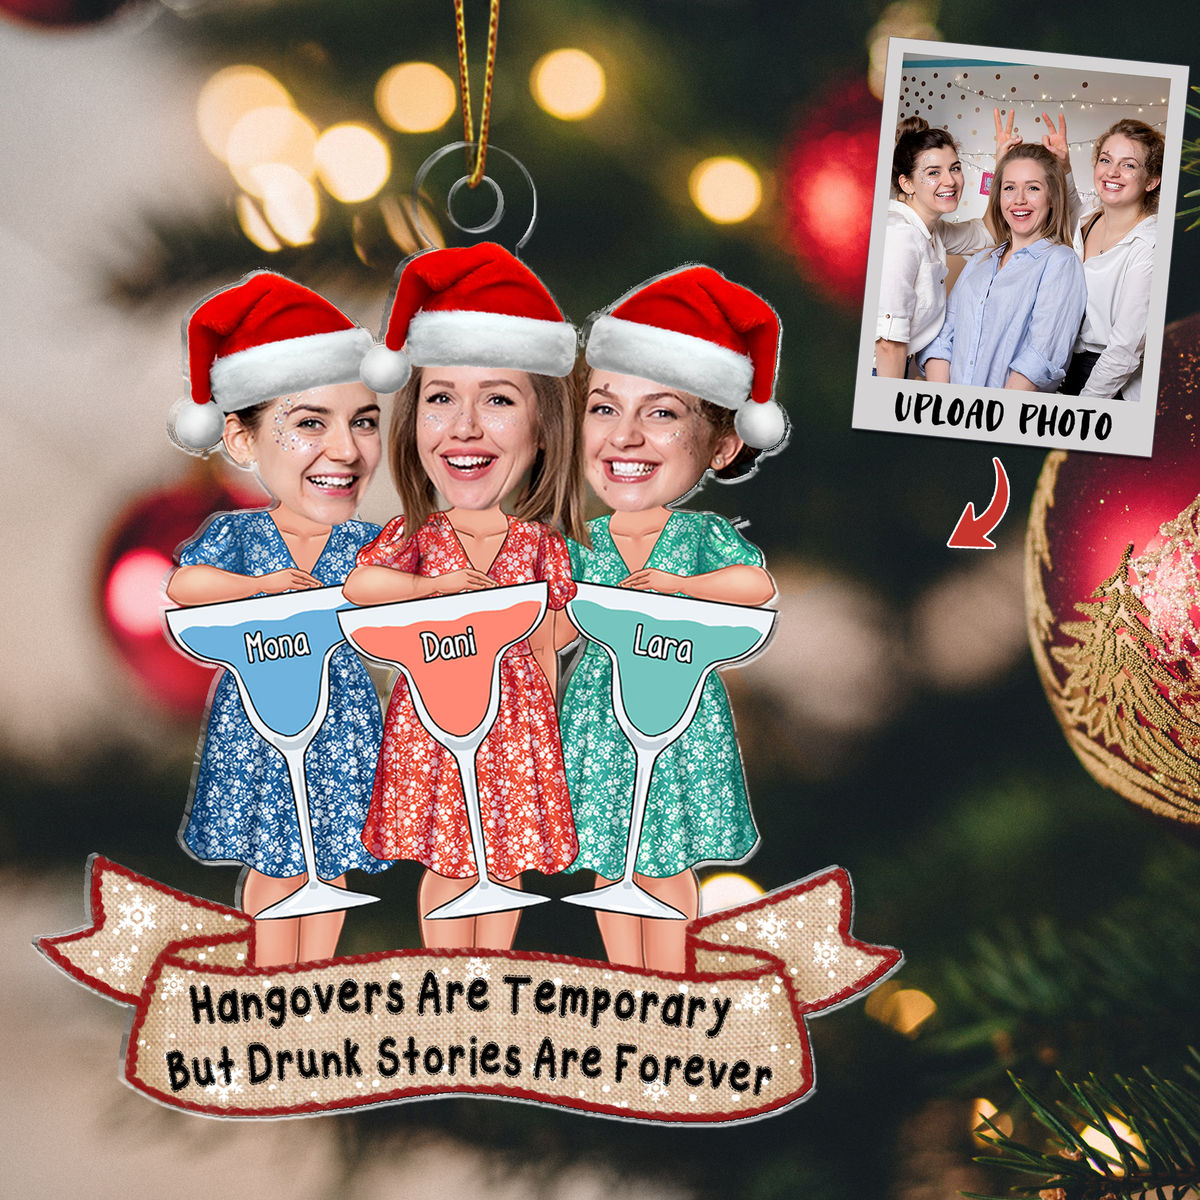 Best Friends Sisters Gifts - Hangovers Are Temporary But Drunk Stories Are Forever - Custom Ornament from Photo